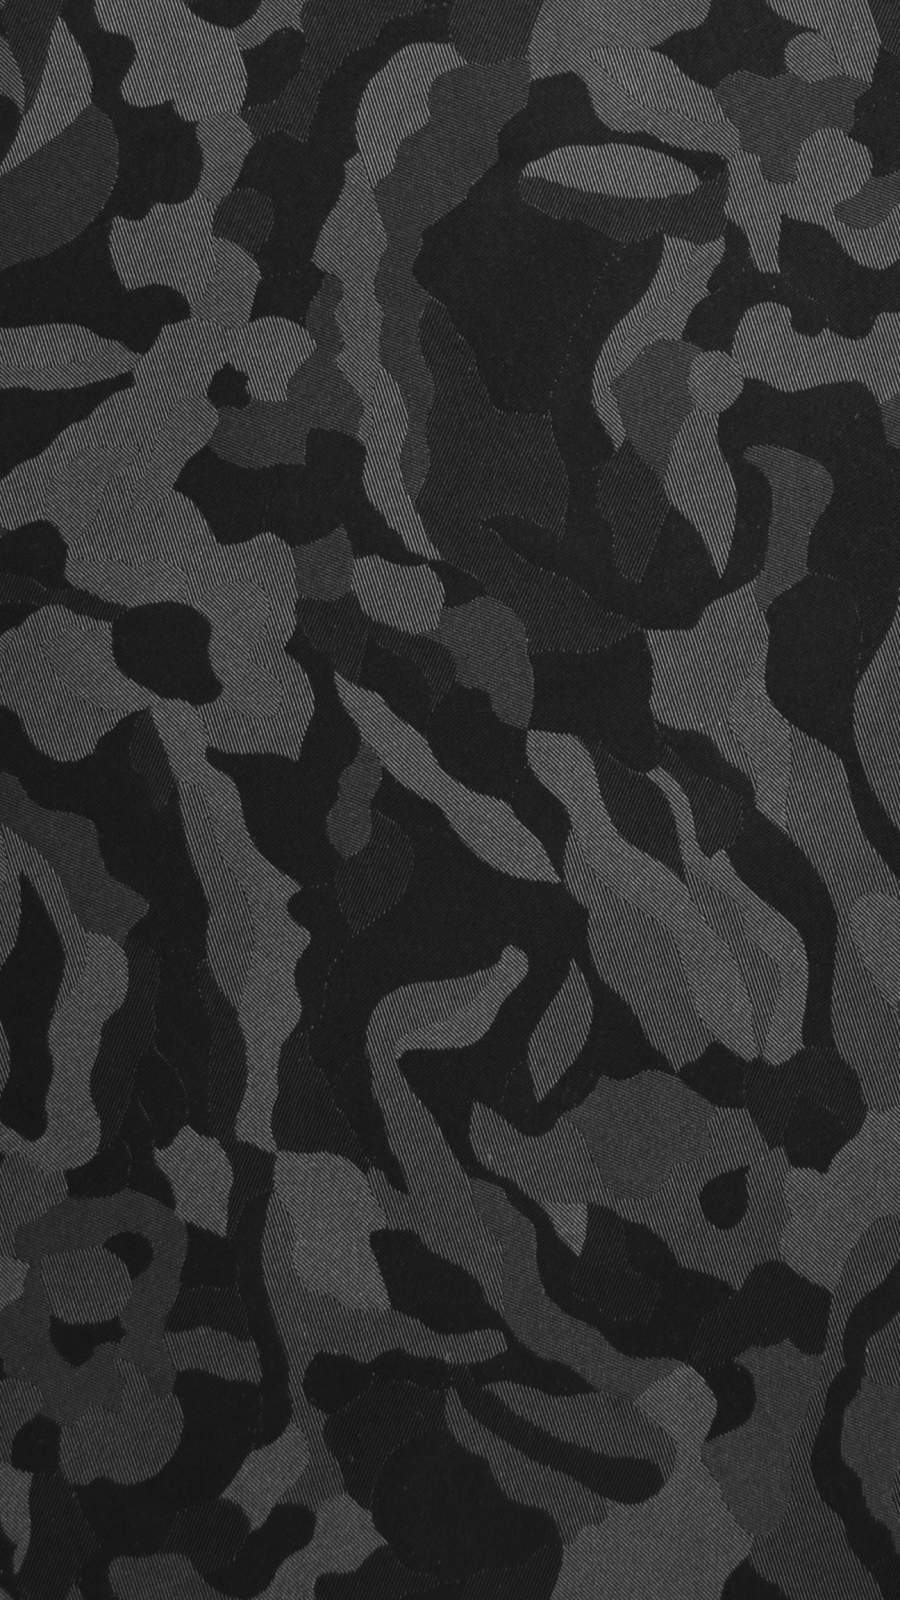 Black Camouflage IPhone Wallpaper - IPhone Wallpapers : iPhone Wallpapers